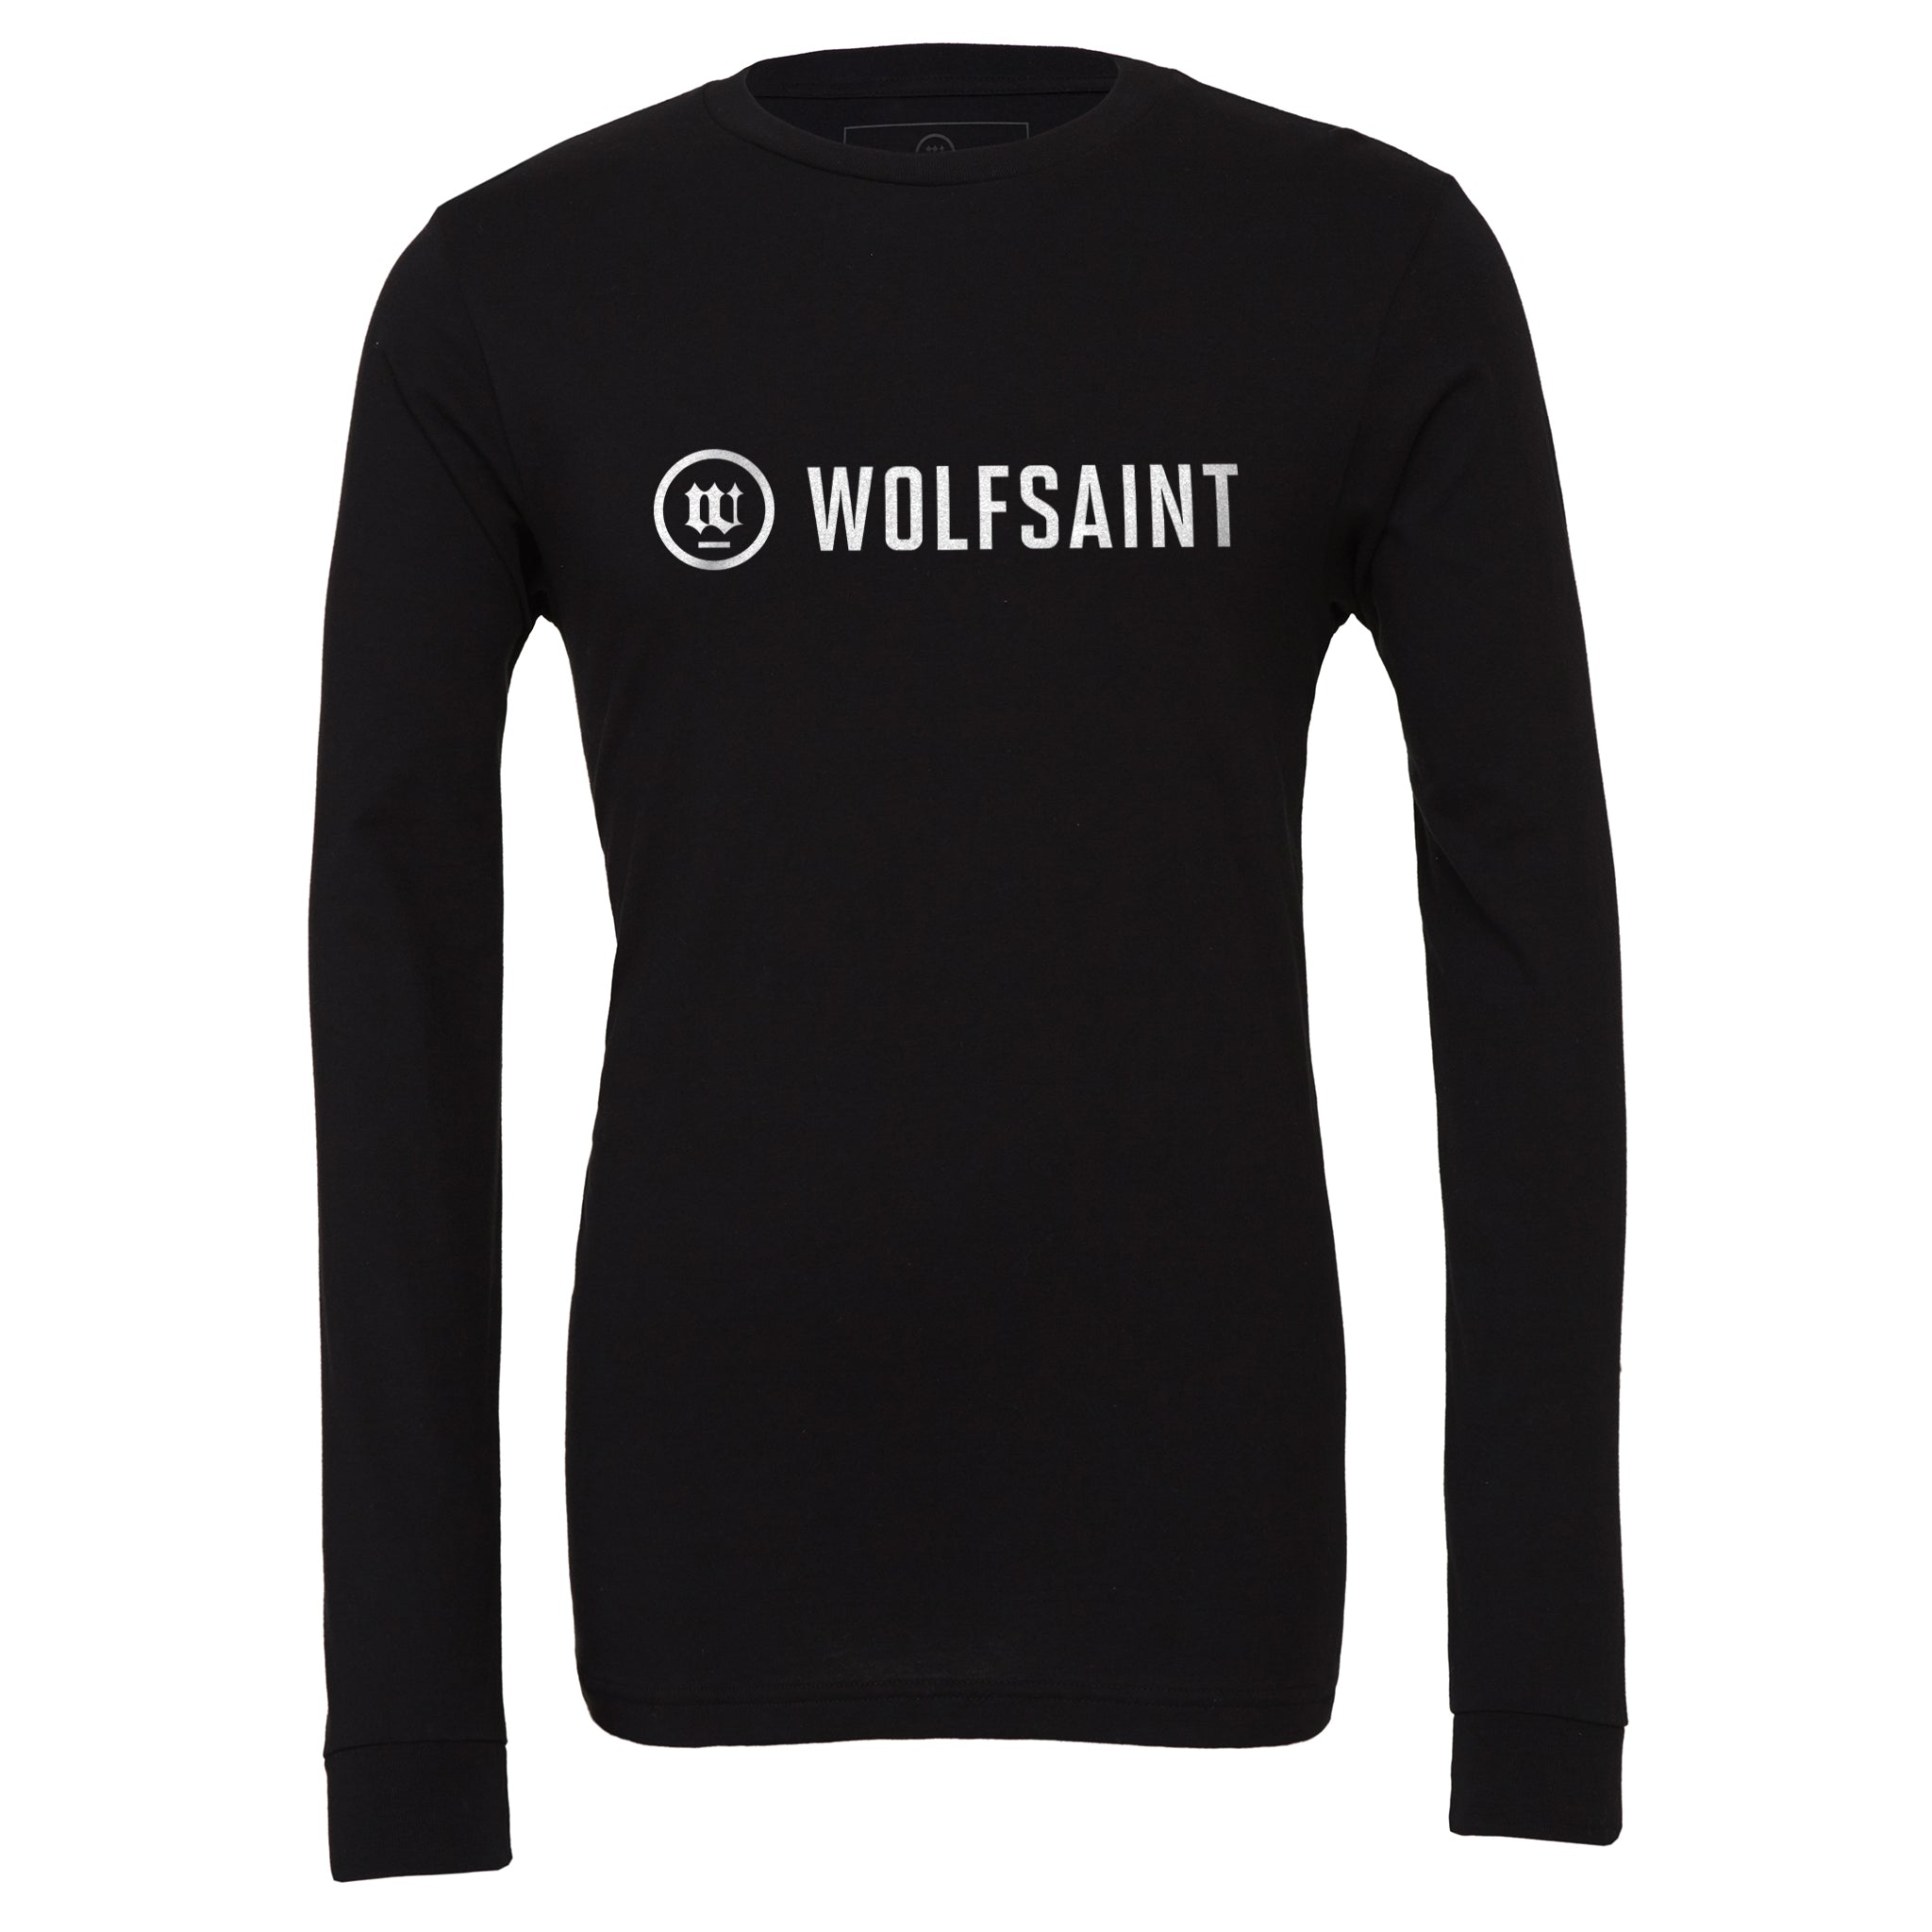 A simple, elegant unisex long sleeved t-shirt in Classic Black, with the fashionable WOLFSAINT logo branding across the chest in white. From Wolfsaint.net